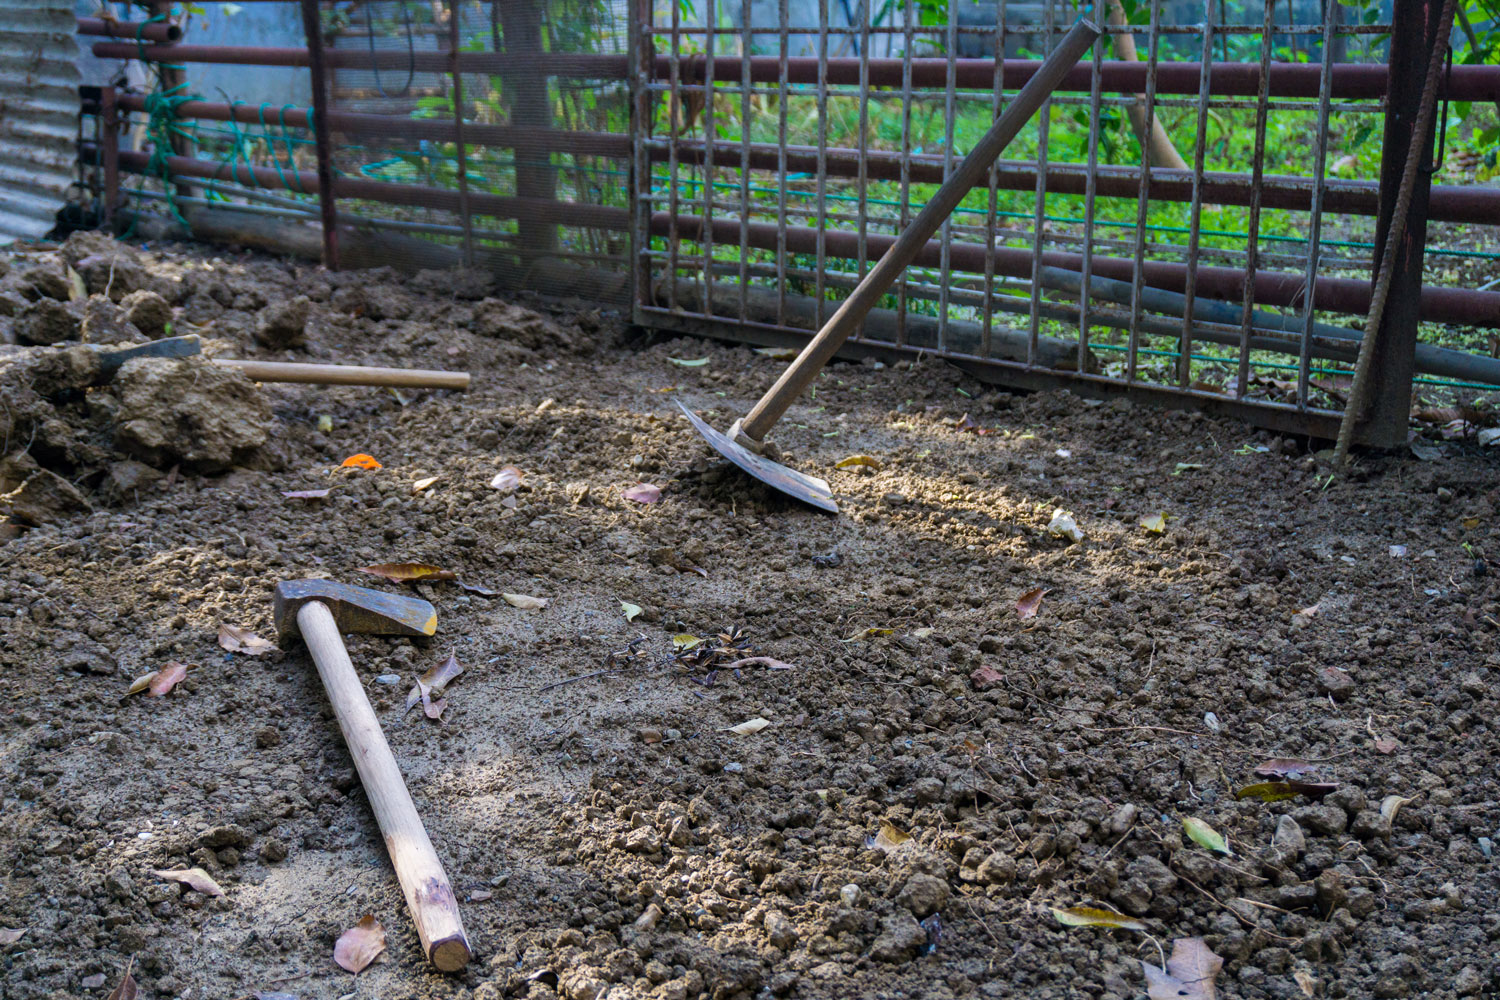 Plowing equipment used for garden rehabilitation